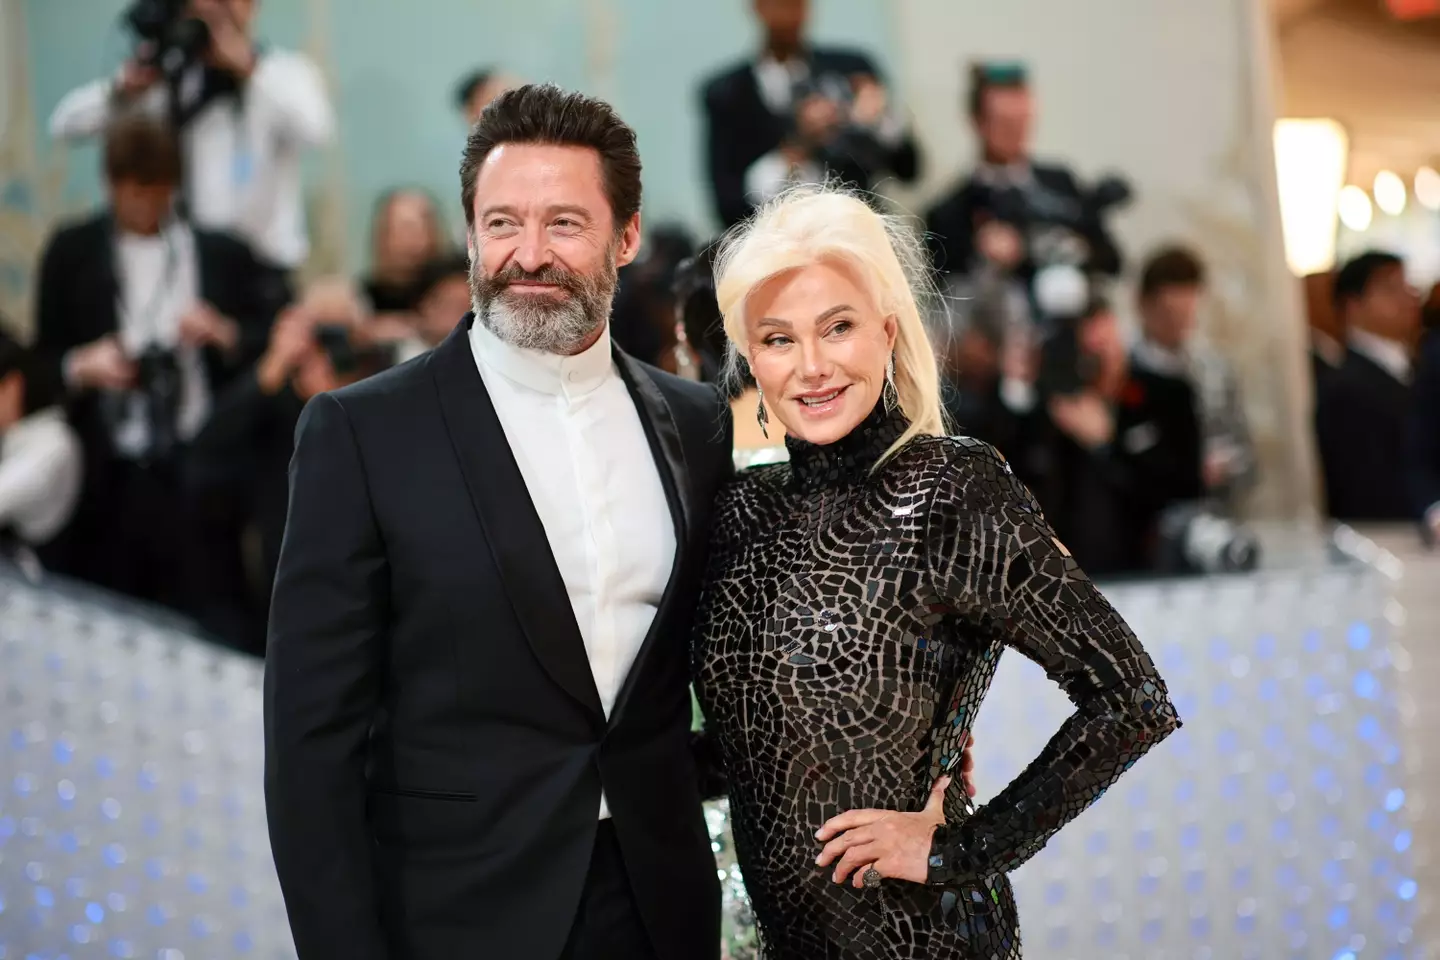 Hugh Jackman and his wife Deborra-Lee have announced that they are separating.